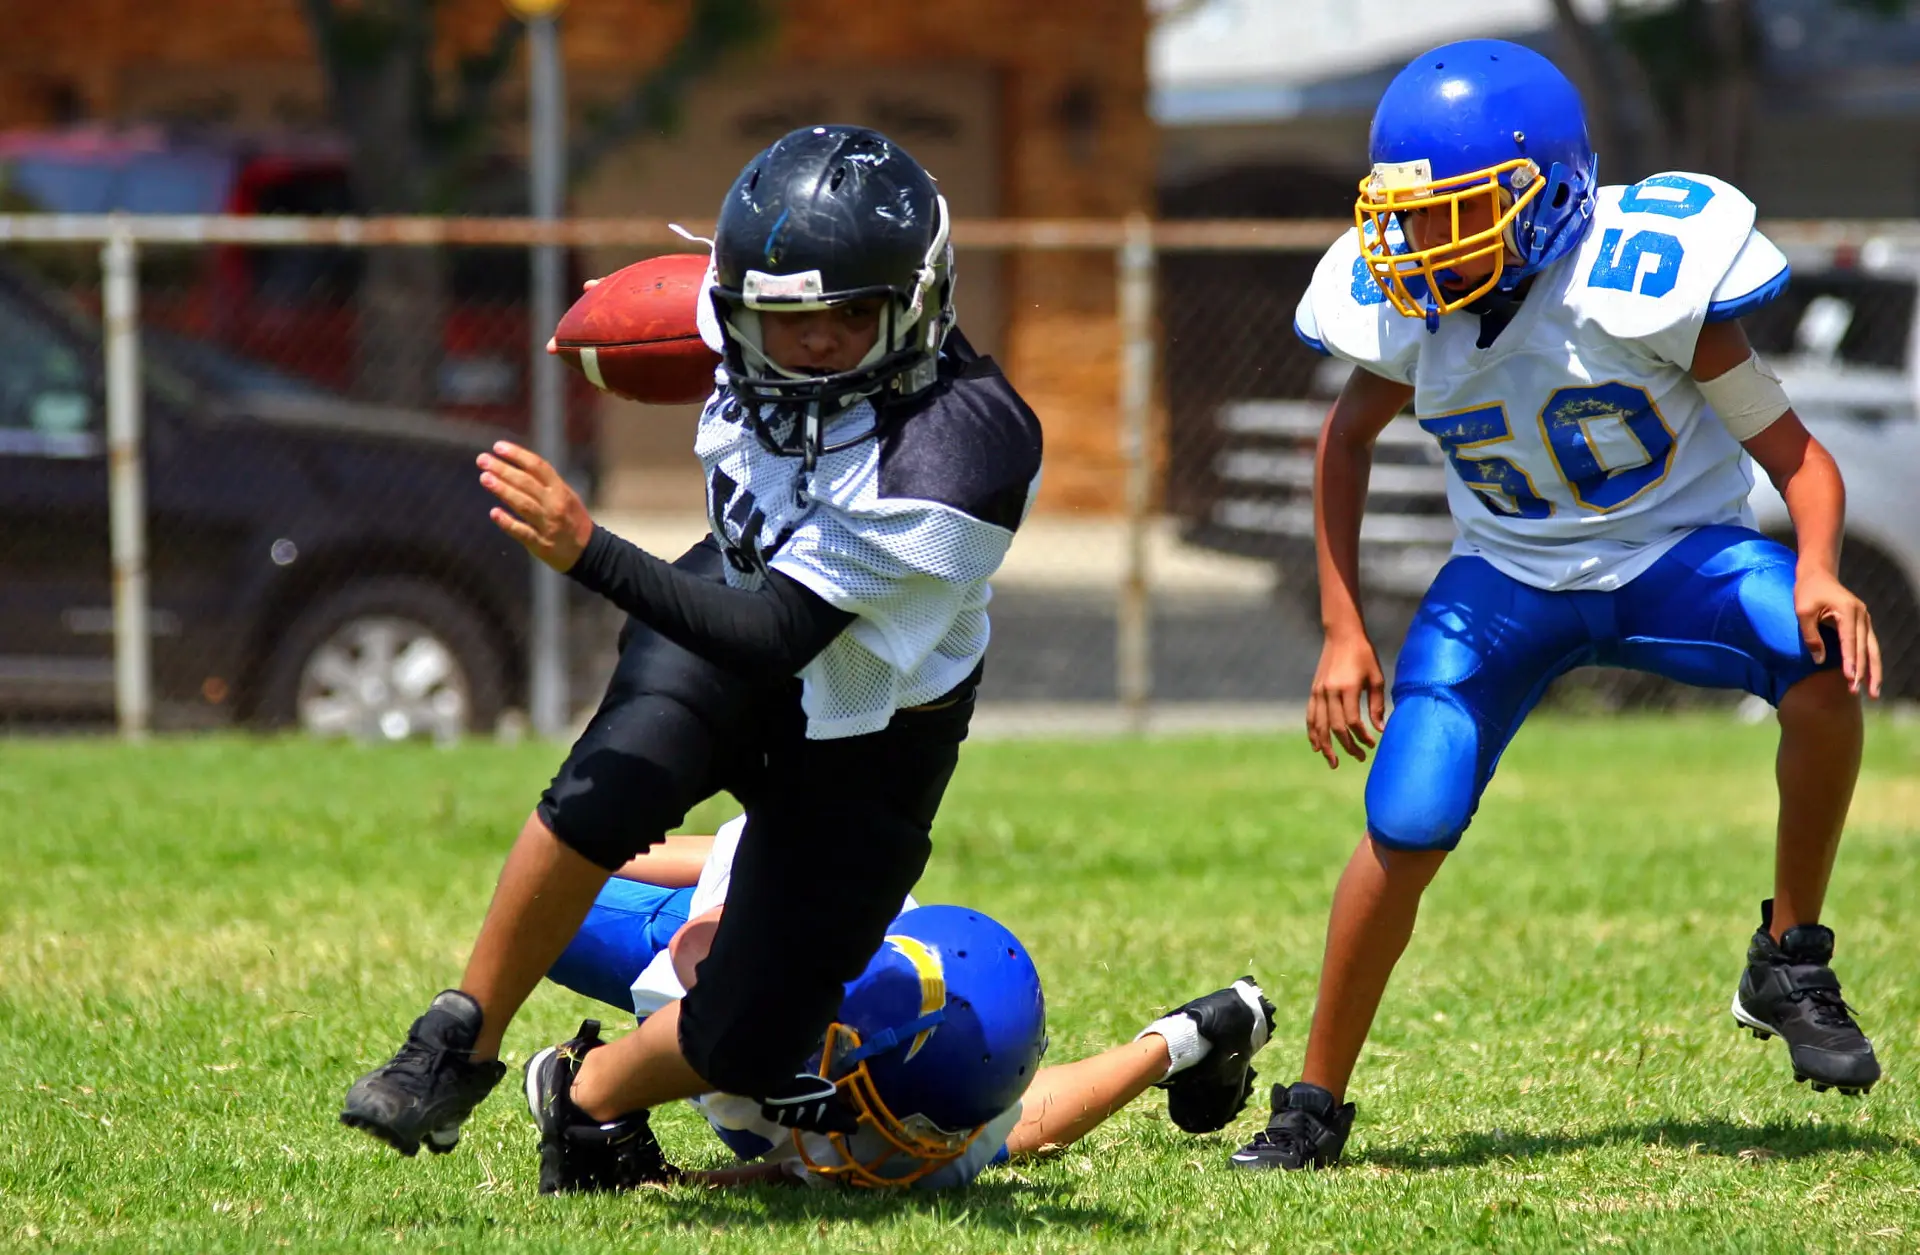 Keeping Children Safe From Concussion is a Shared Responsibility